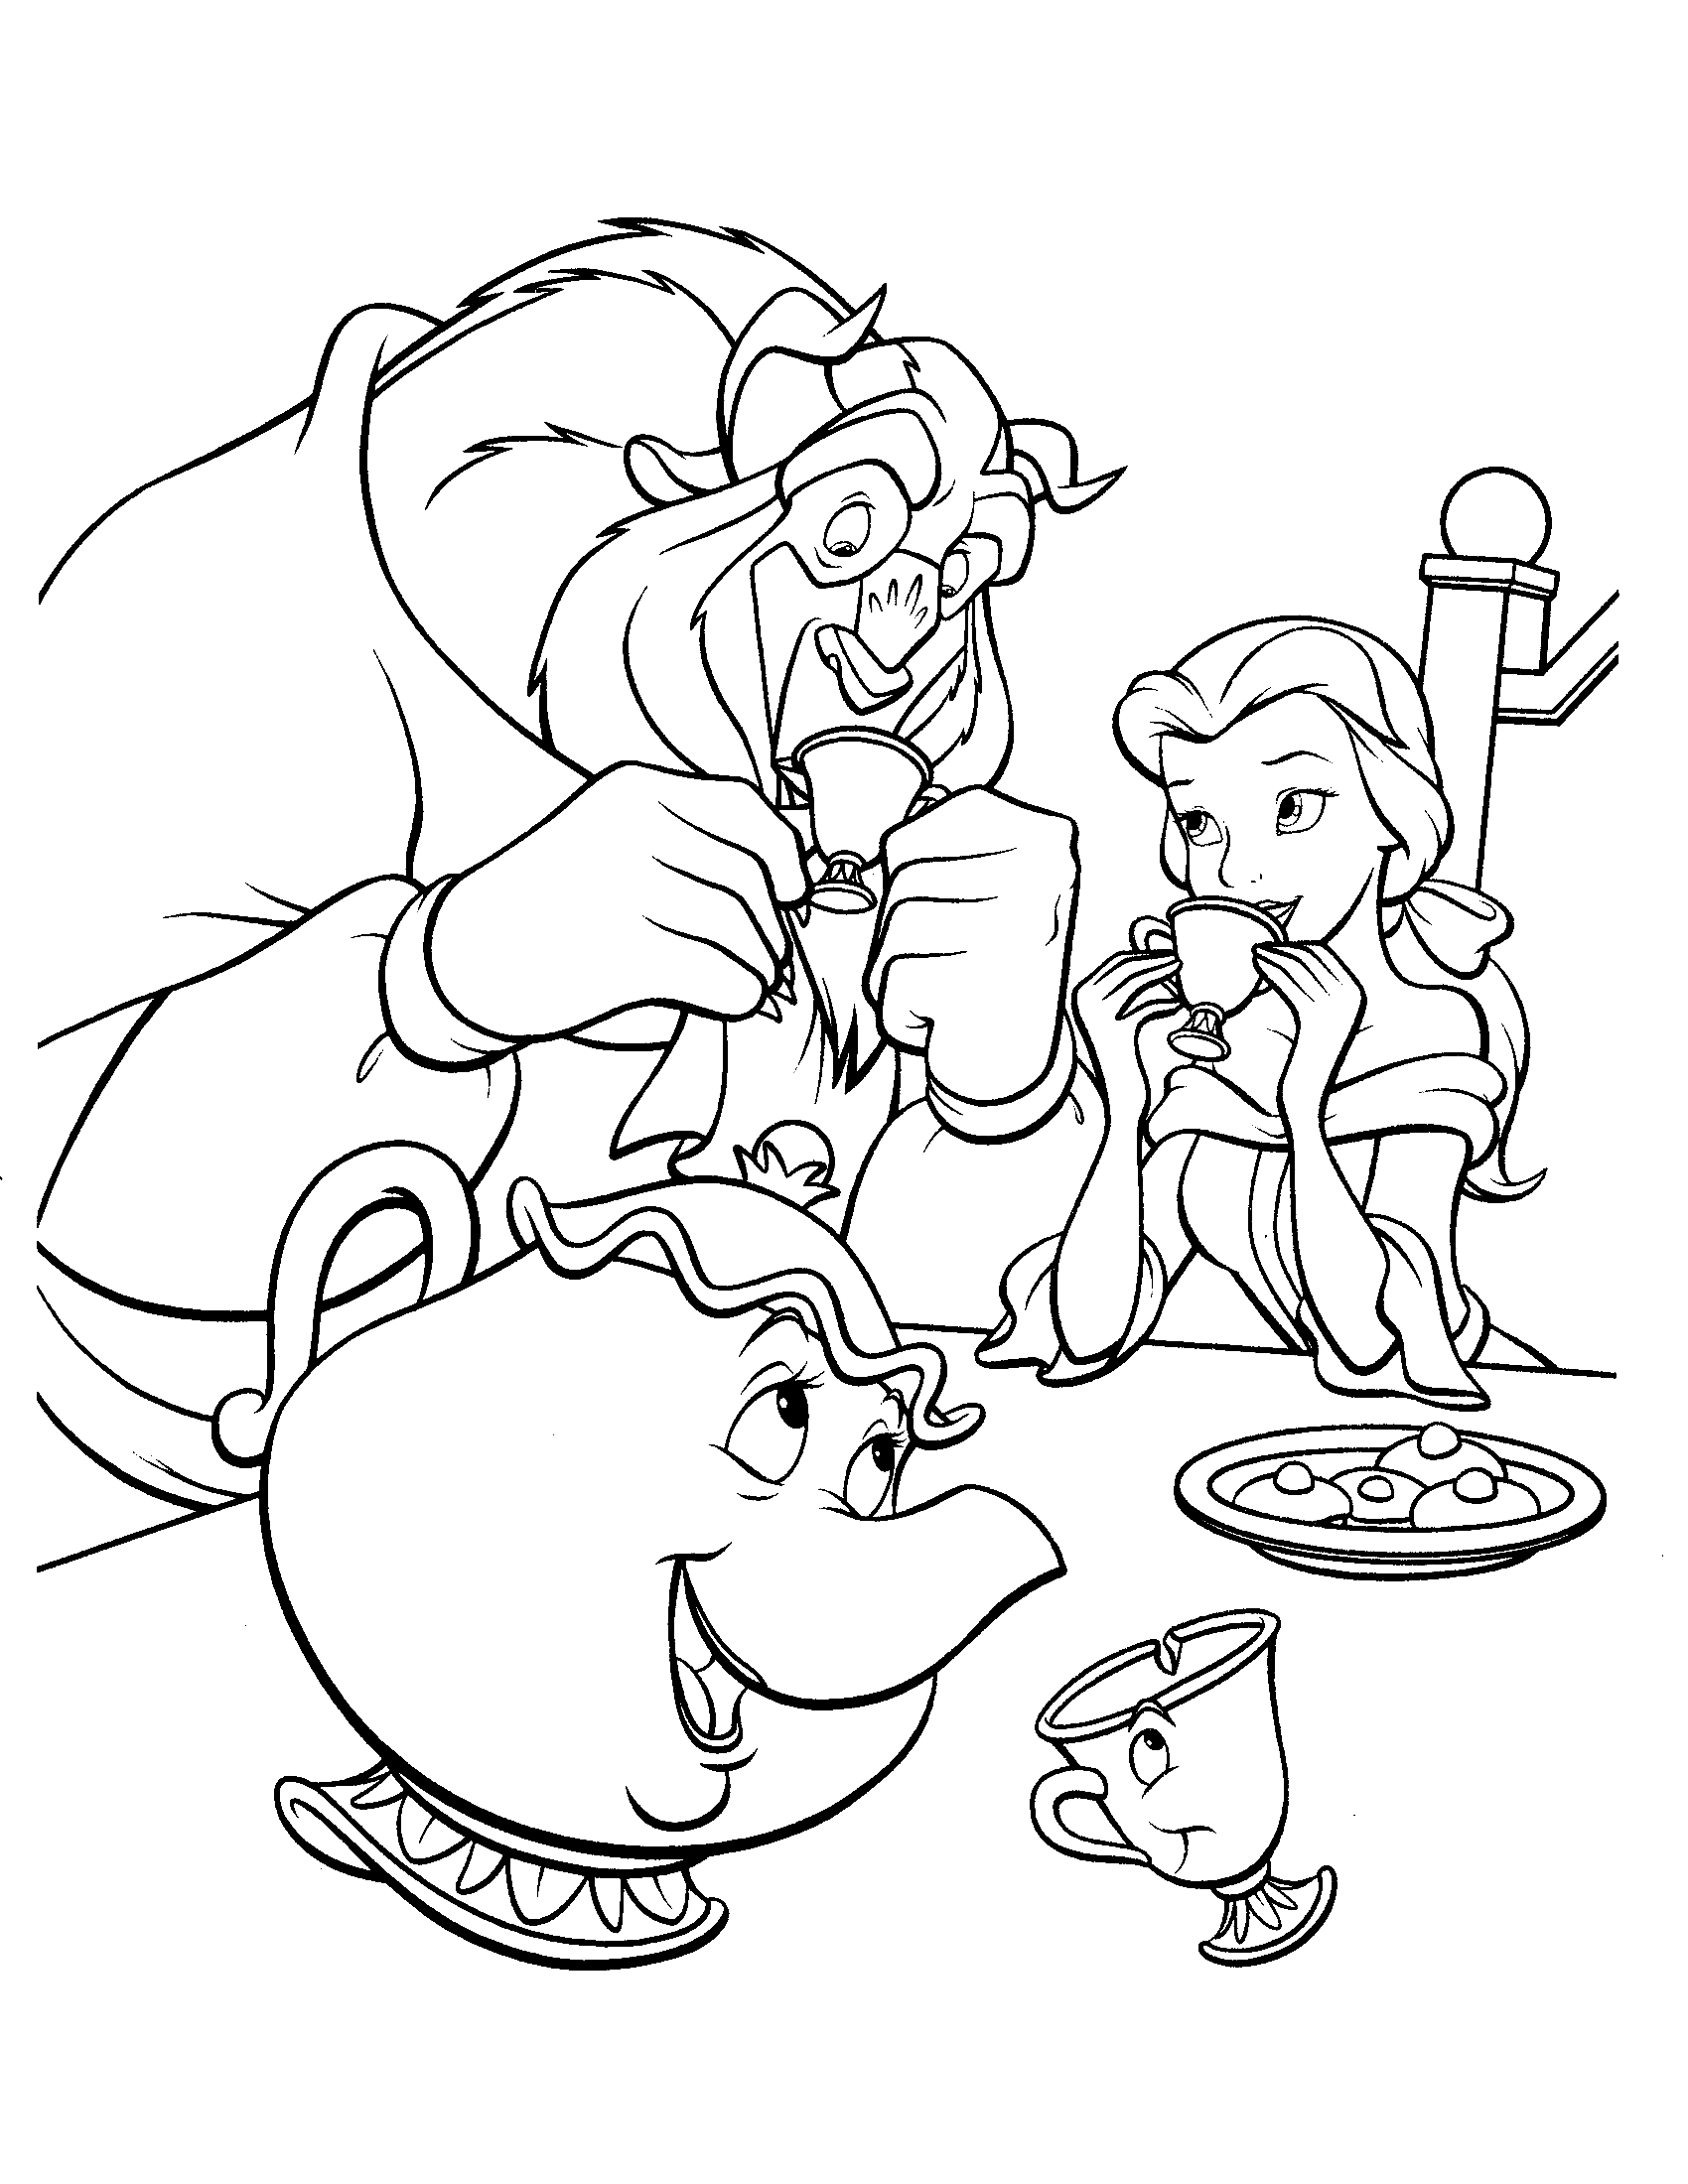 Coloring page of beauty Belle with the Beast